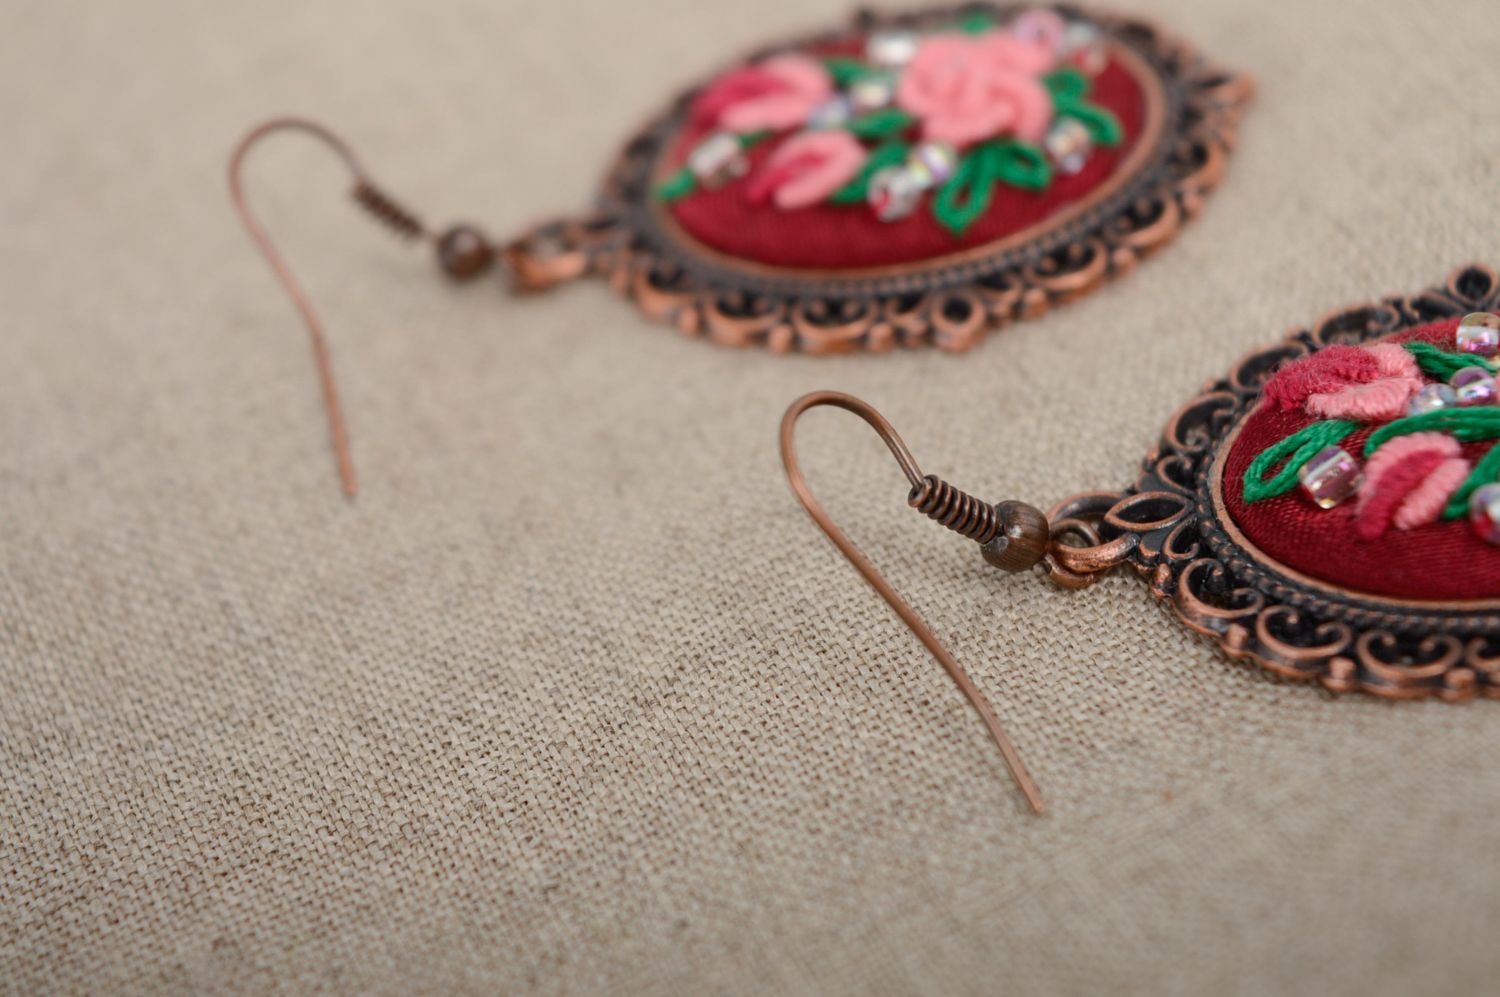 Rococo embroidered earrings and pendant in vintage style photo 5